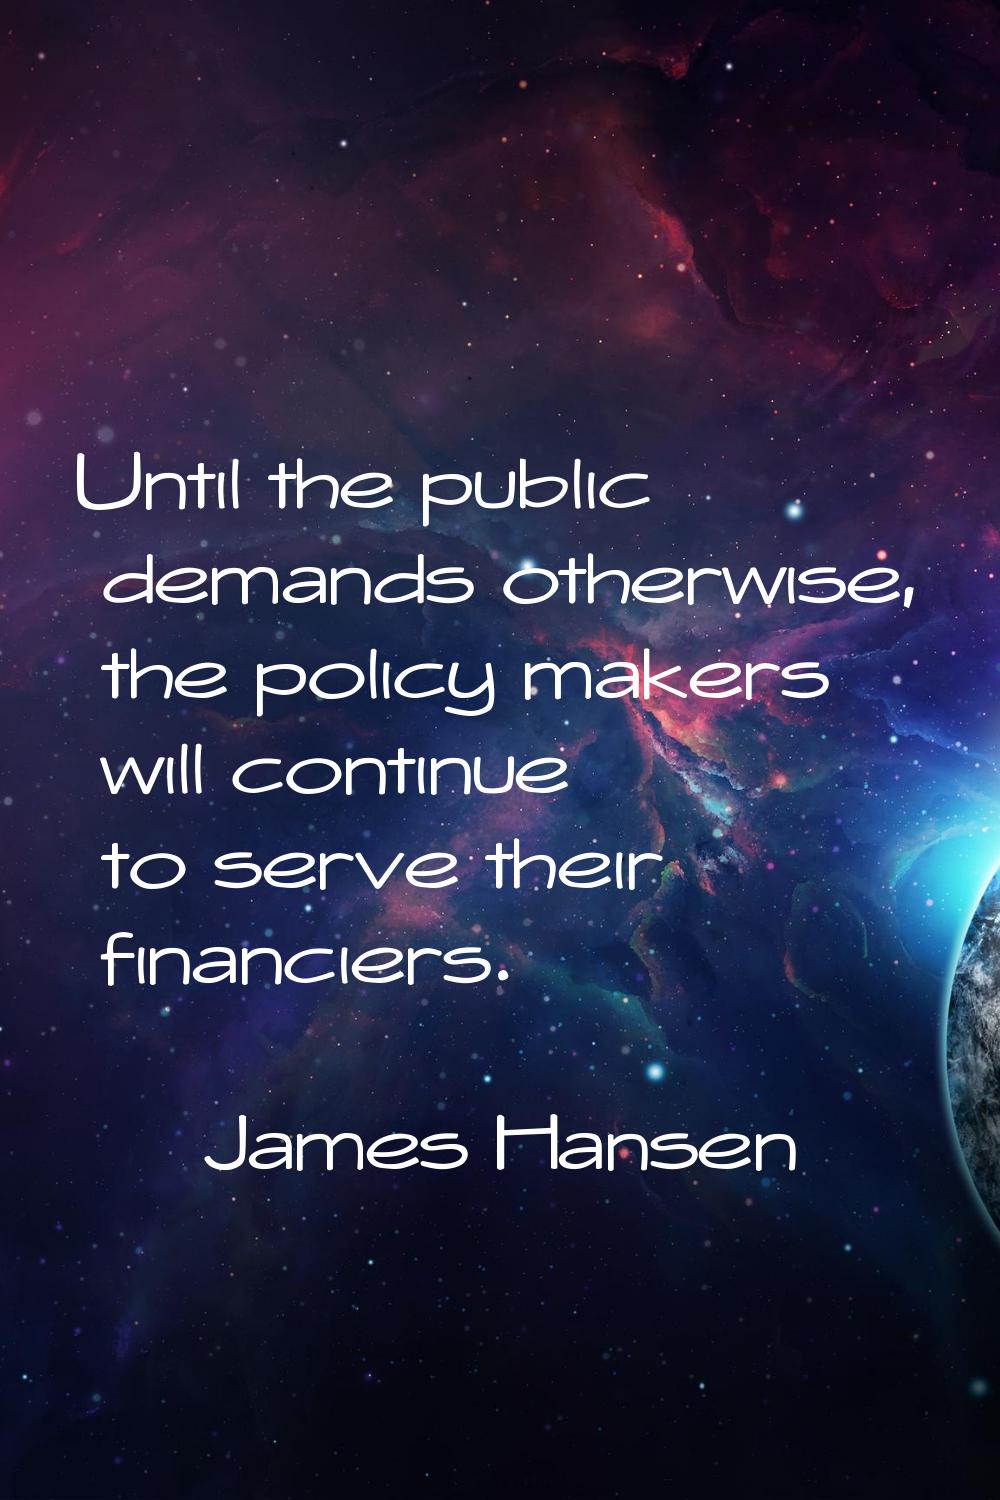 Until the public demands otherwise, the policy makers will continue to serve their financiers.